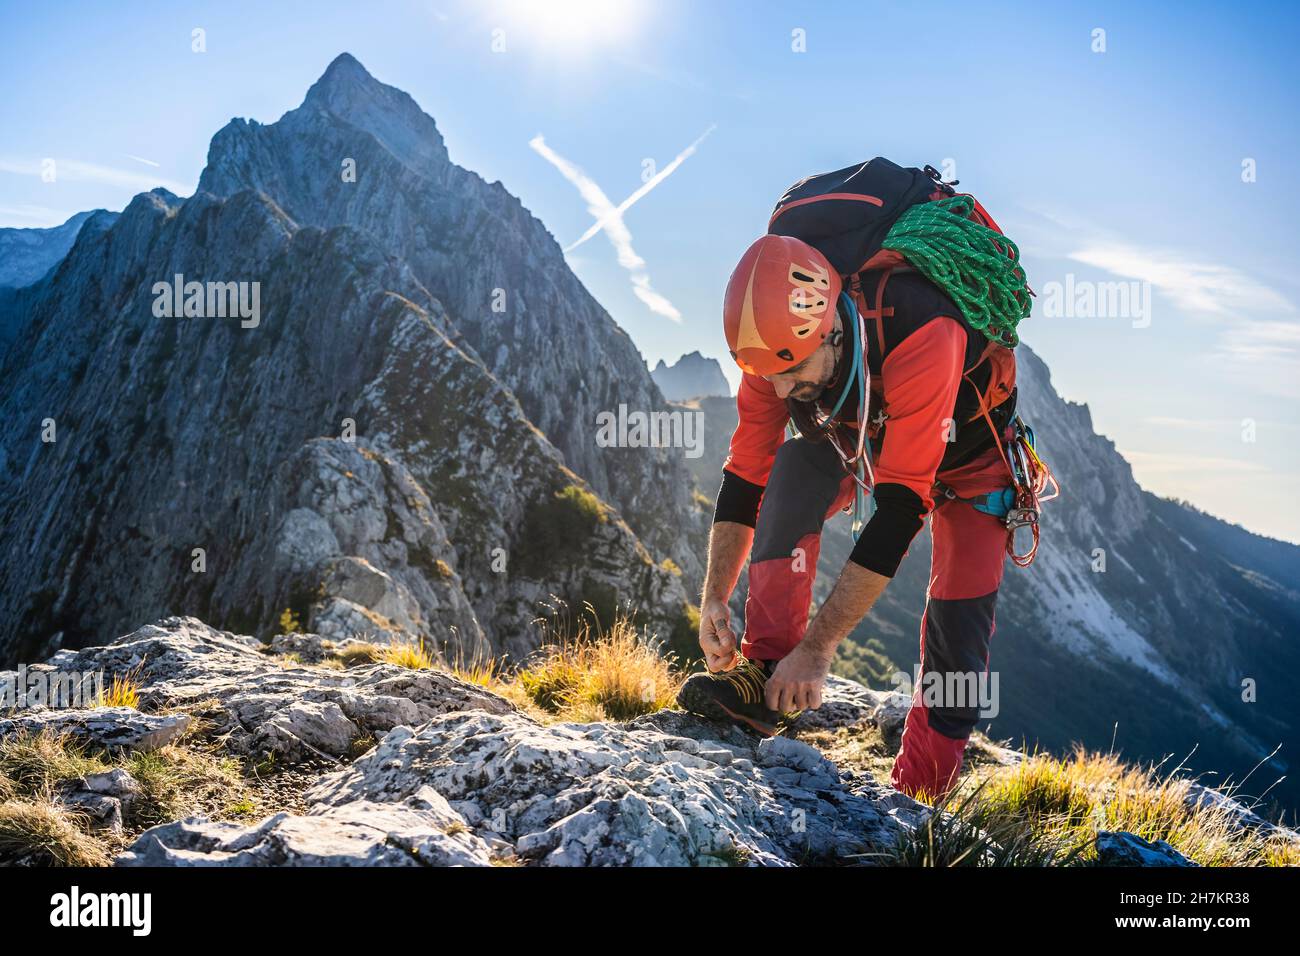 Mature male hiker tying shoelace on mountain Stock Photo